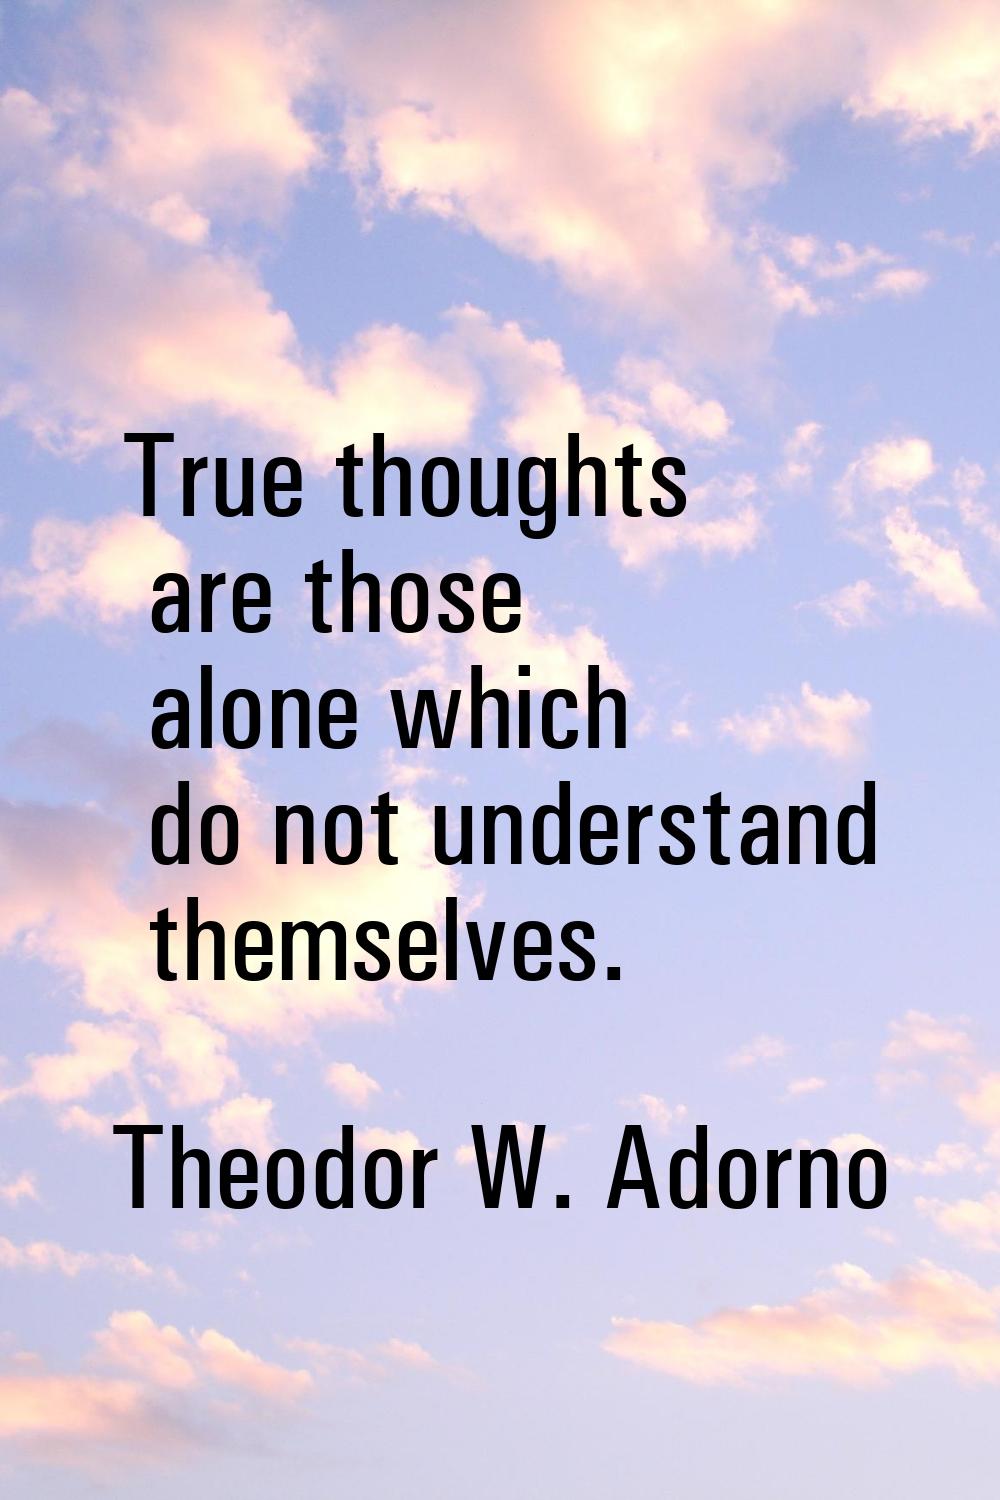 True thoughts are those alone which do not understand themselves.